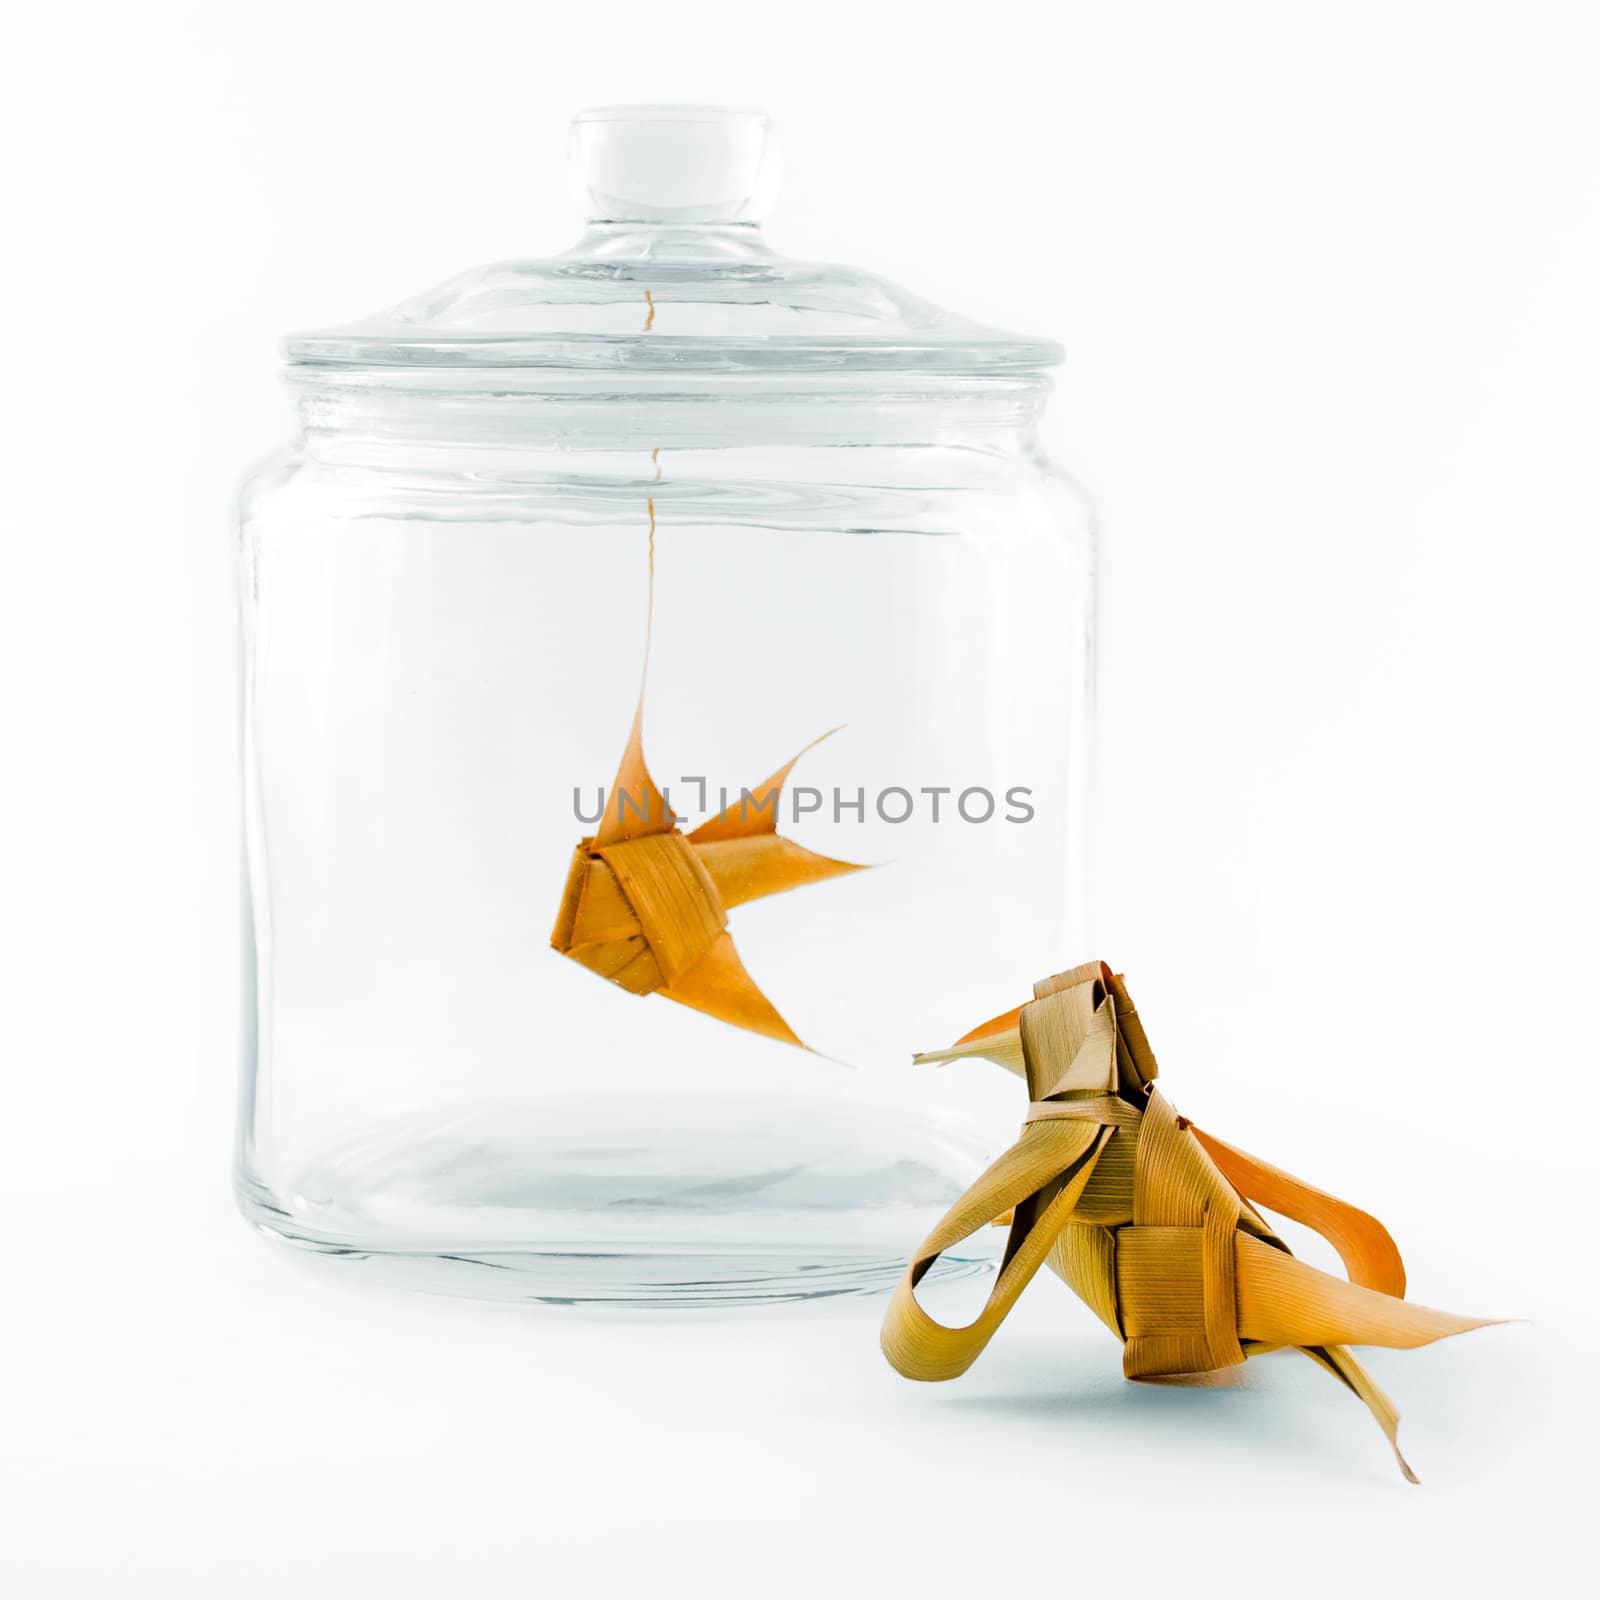 Leaf-made bird looking at a leaf-made fish in a glass jar.